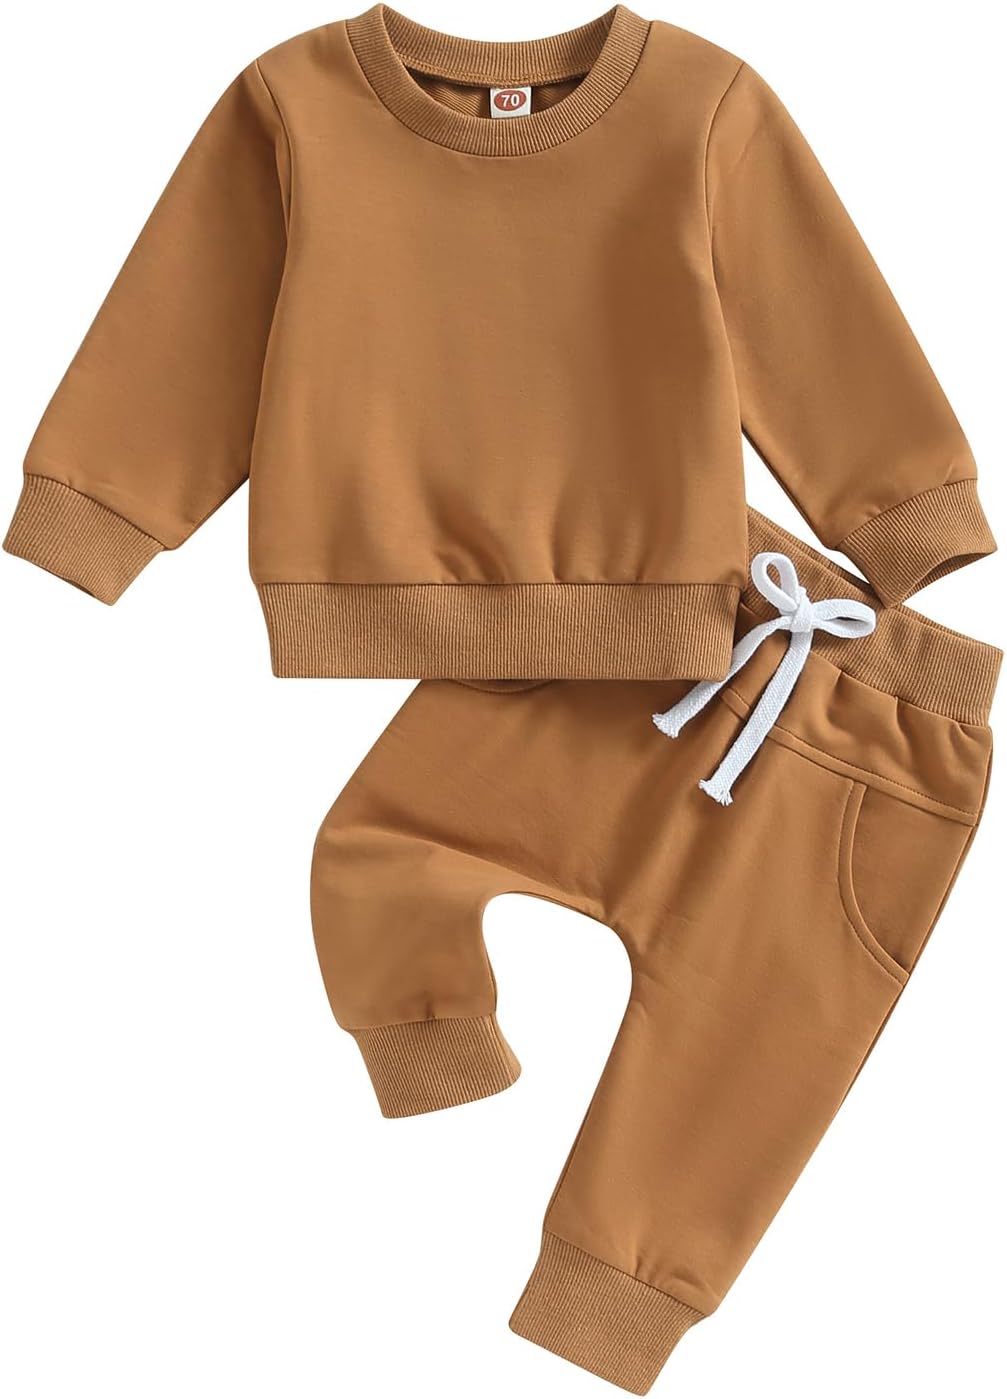 Thorn Tree Toddler Baby Boys Fall Outfits Long Sleeve Pull On Sweatshirt Elastic Waist Pants 2Pcs Solid Clothes Set